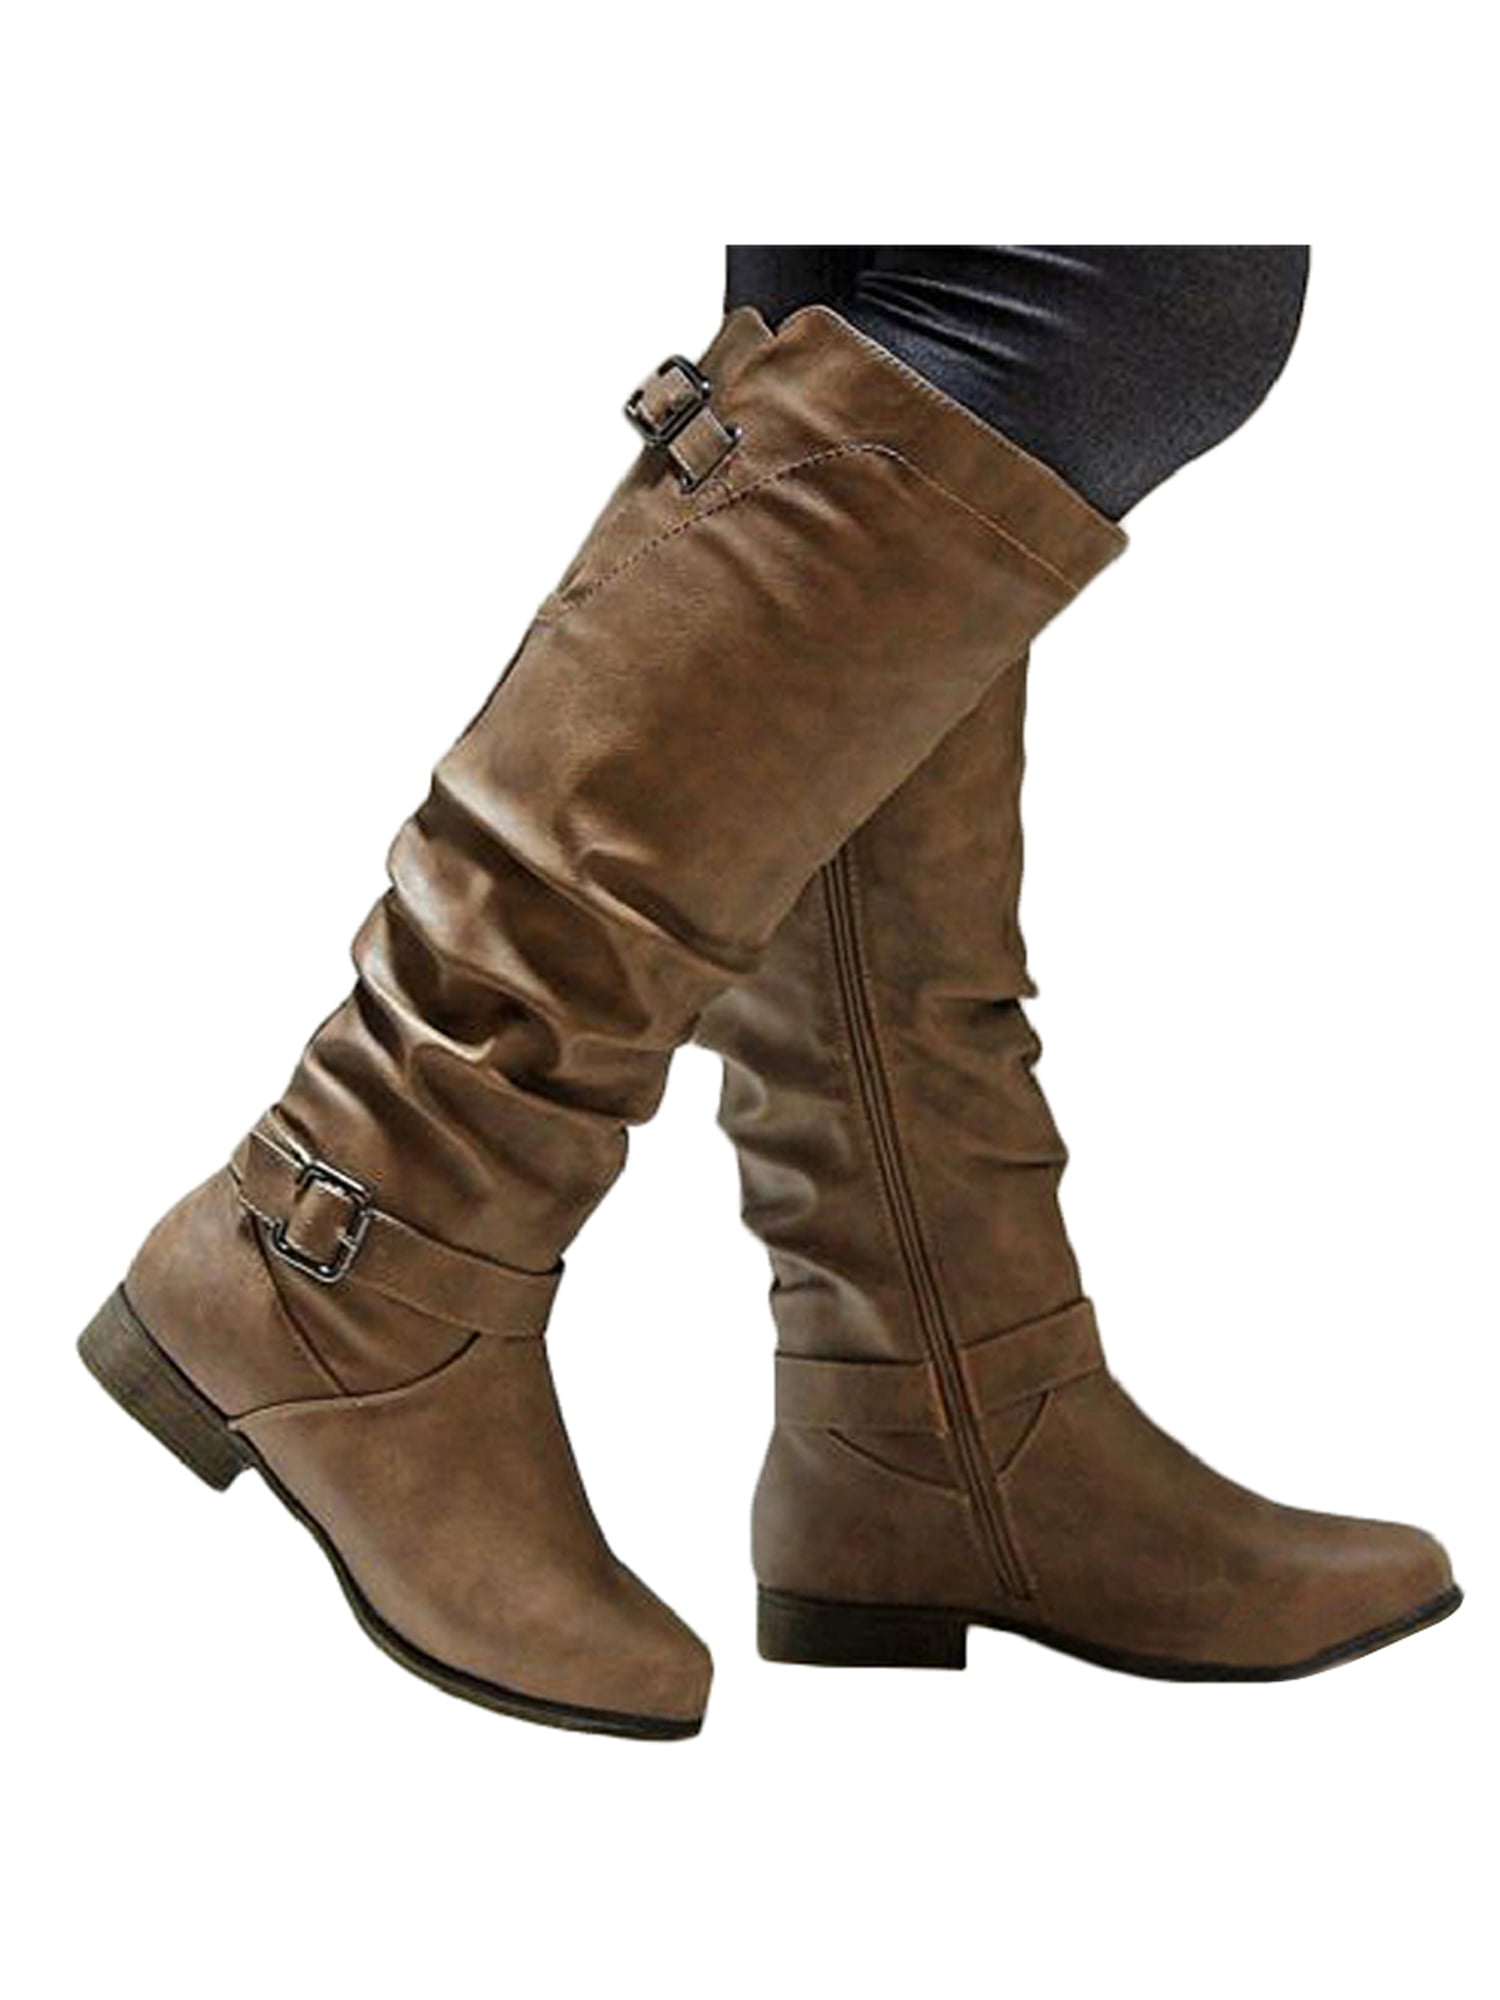 New Womens Pu Leather Knee High Boots Riding Biker Belt Buckle Boots Fashion